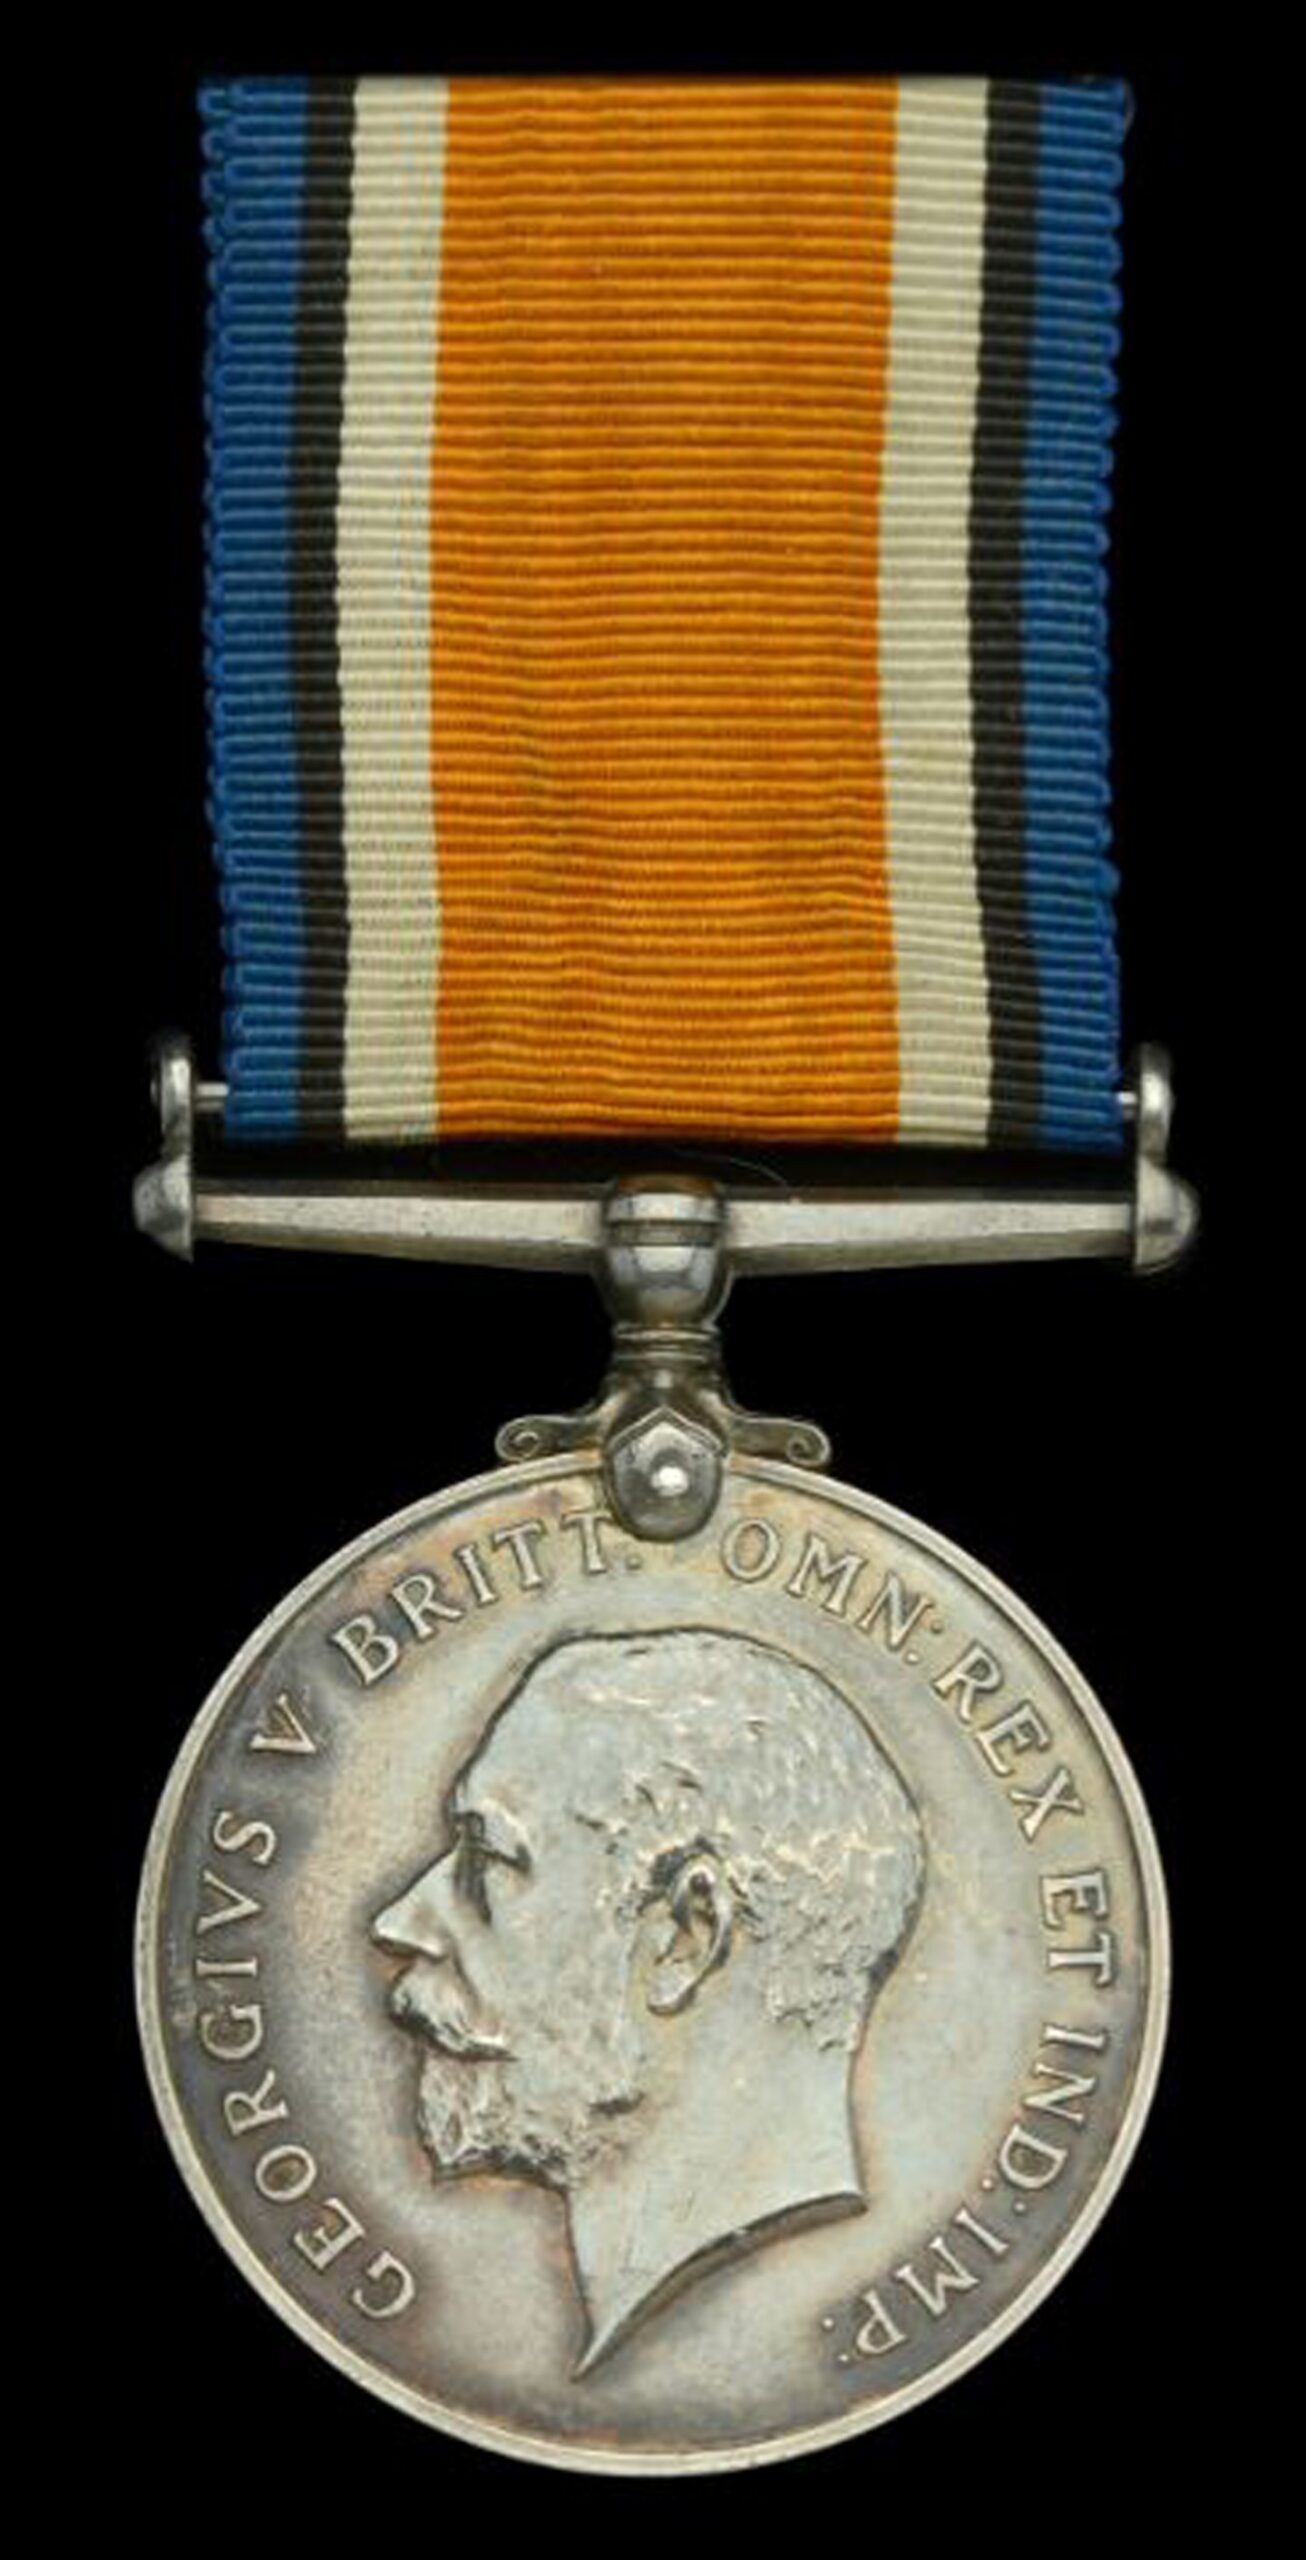 British War Medal awarded to Aberdeen's Emily R Duncan for serving in WW1.